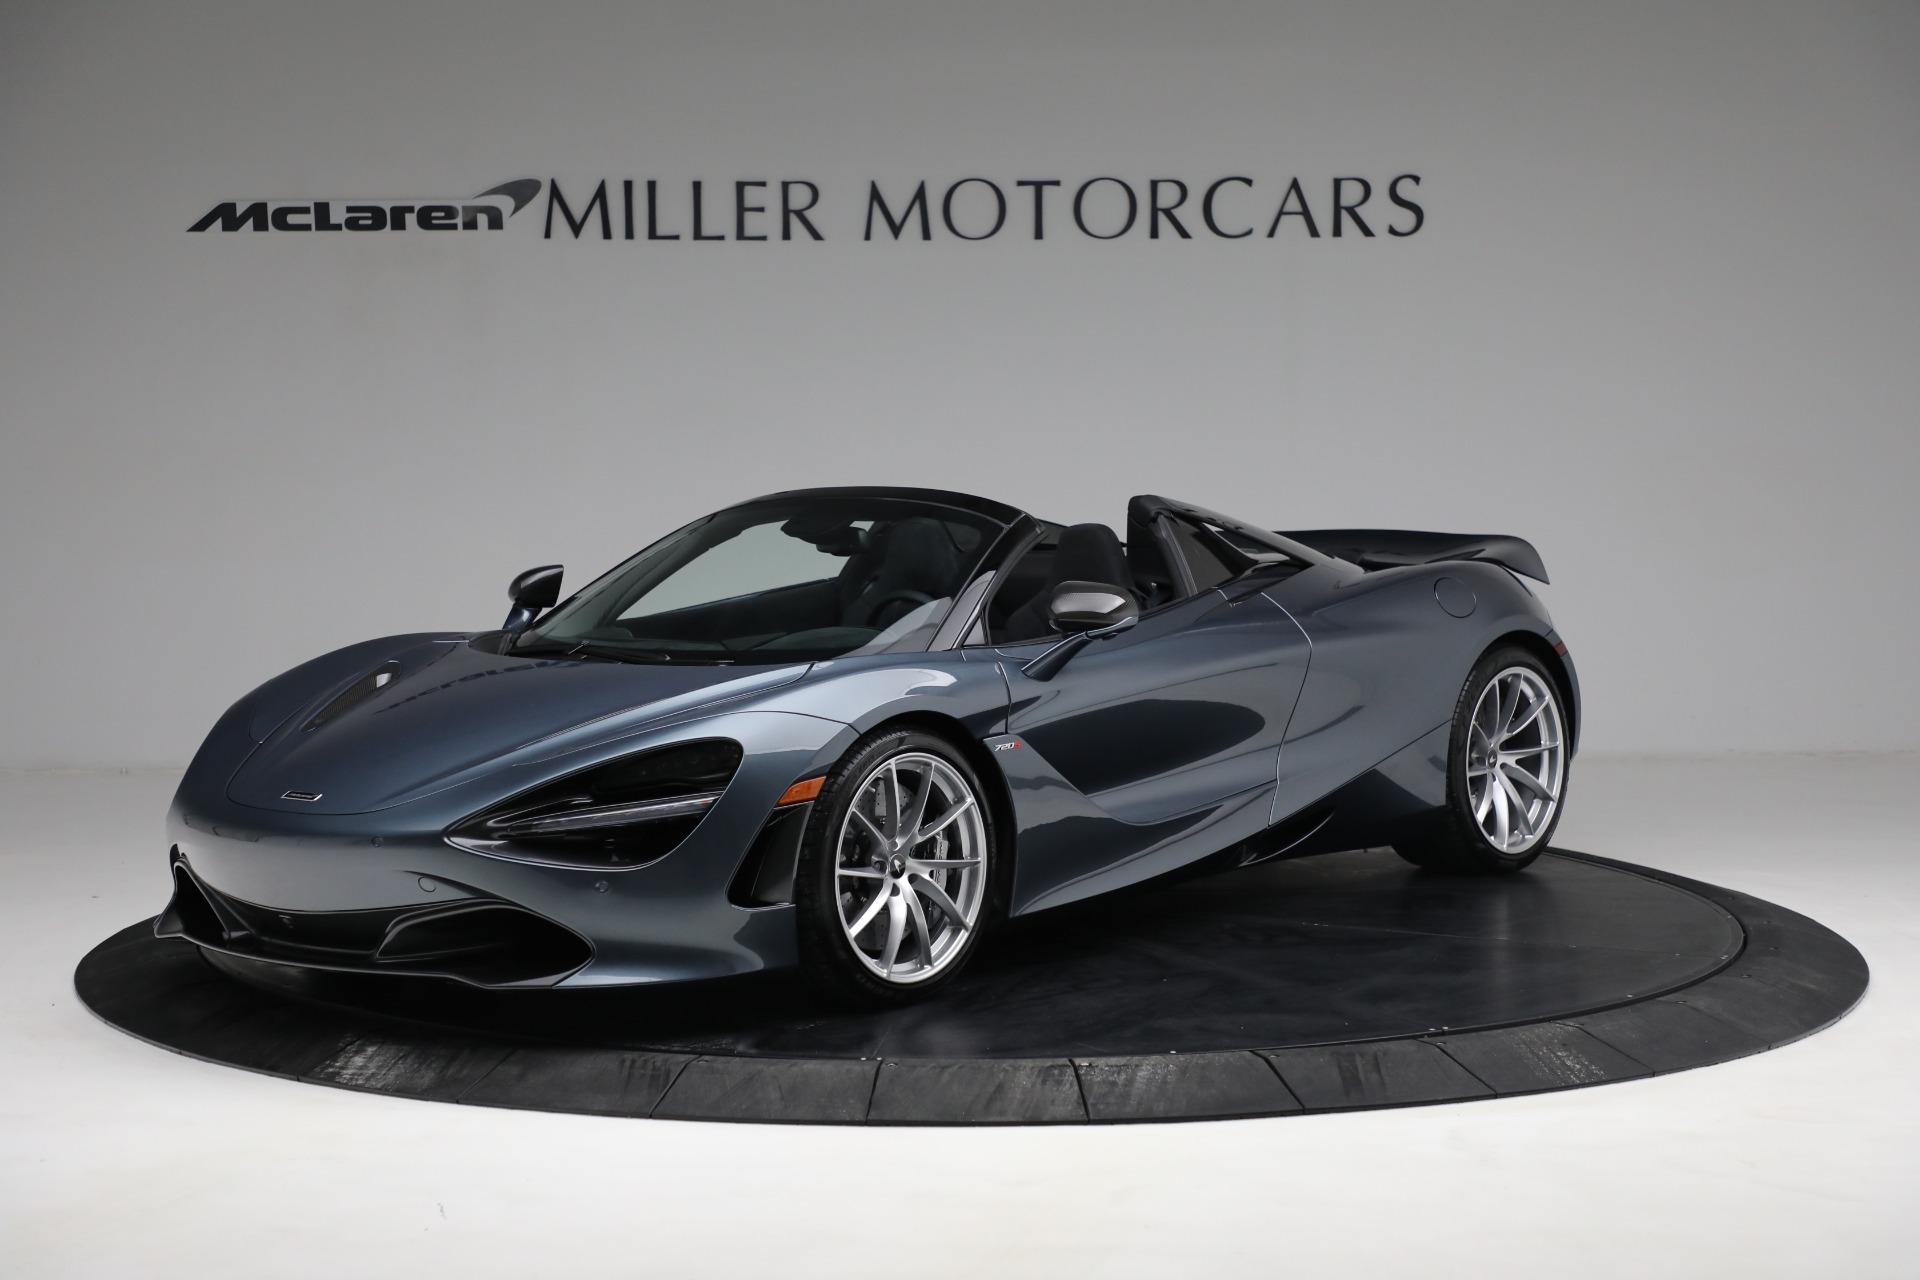 Used 2020 McLaren 720S Spider for sale Sold at Bugatti of Greenwich in Greenwich CT 06830 1